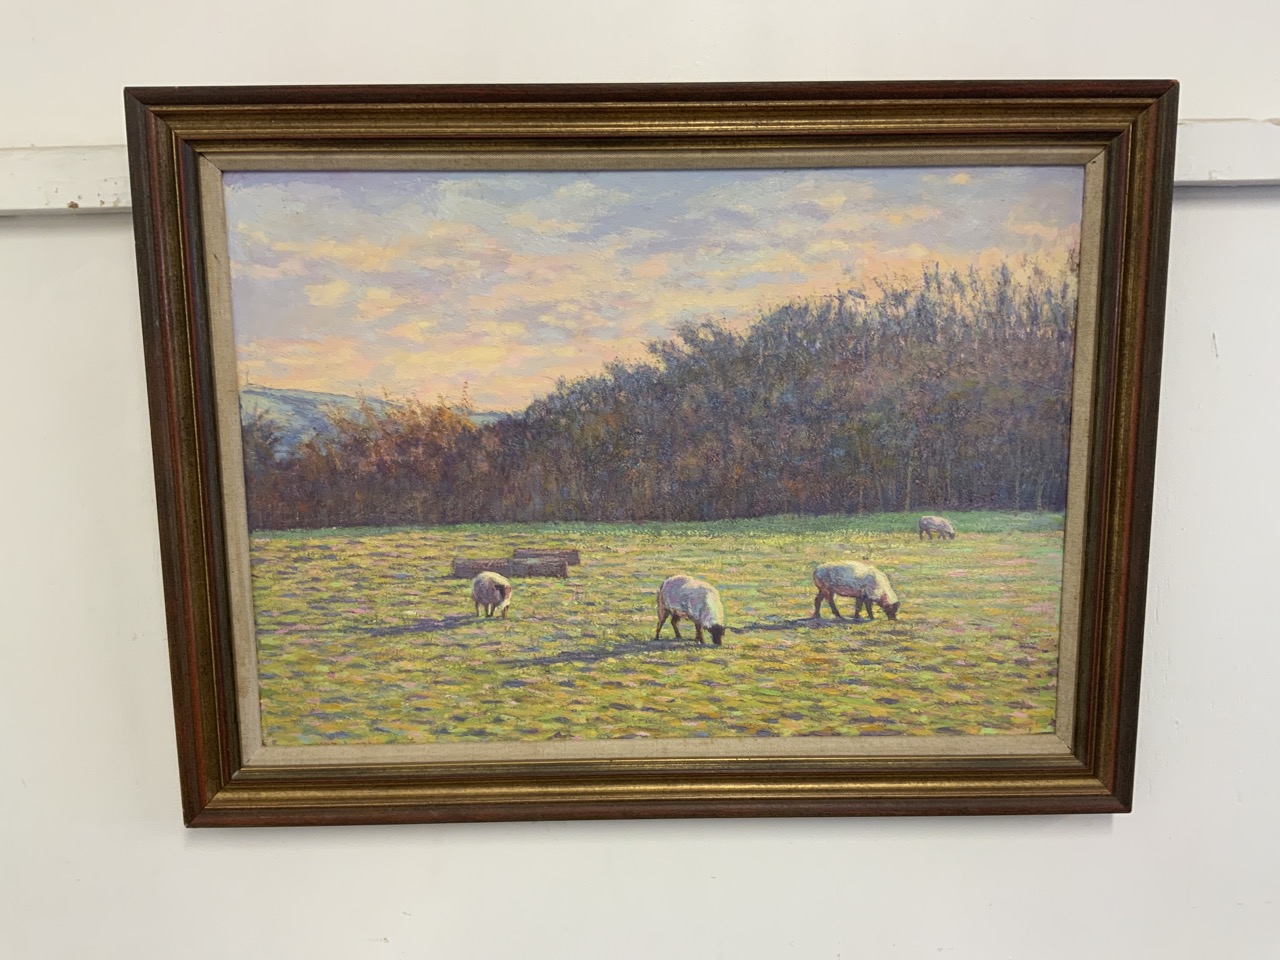 A 20th century oil on board in. Gilt frame and mount. Sheep and an avenging sunset. Unsigned.W: - Image 4 of 4